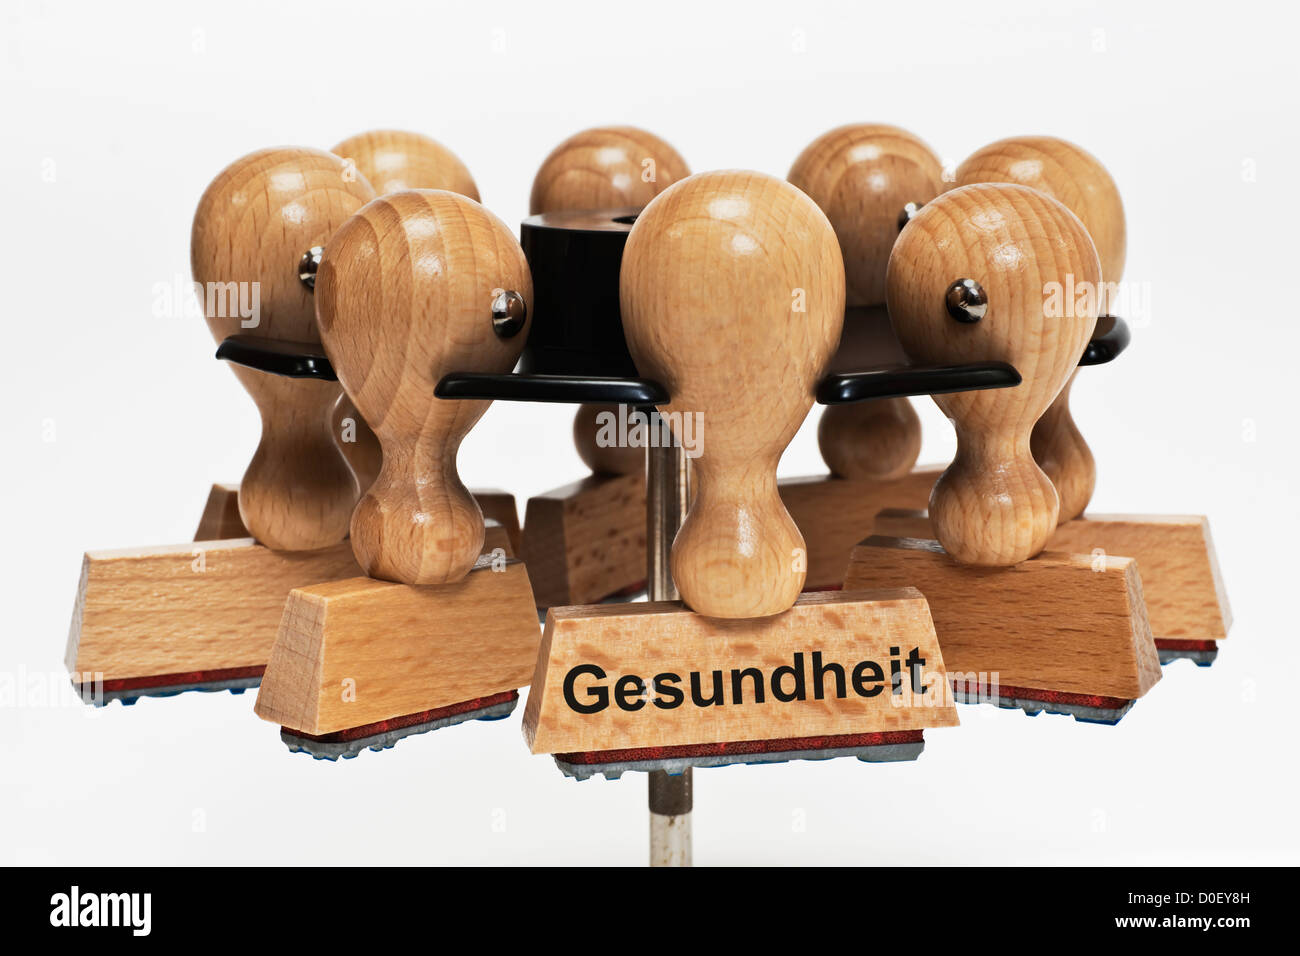 Many stamps hanging in a stamp rack, one with the German inscription Gesundheit (Health), background white. Stock Photo